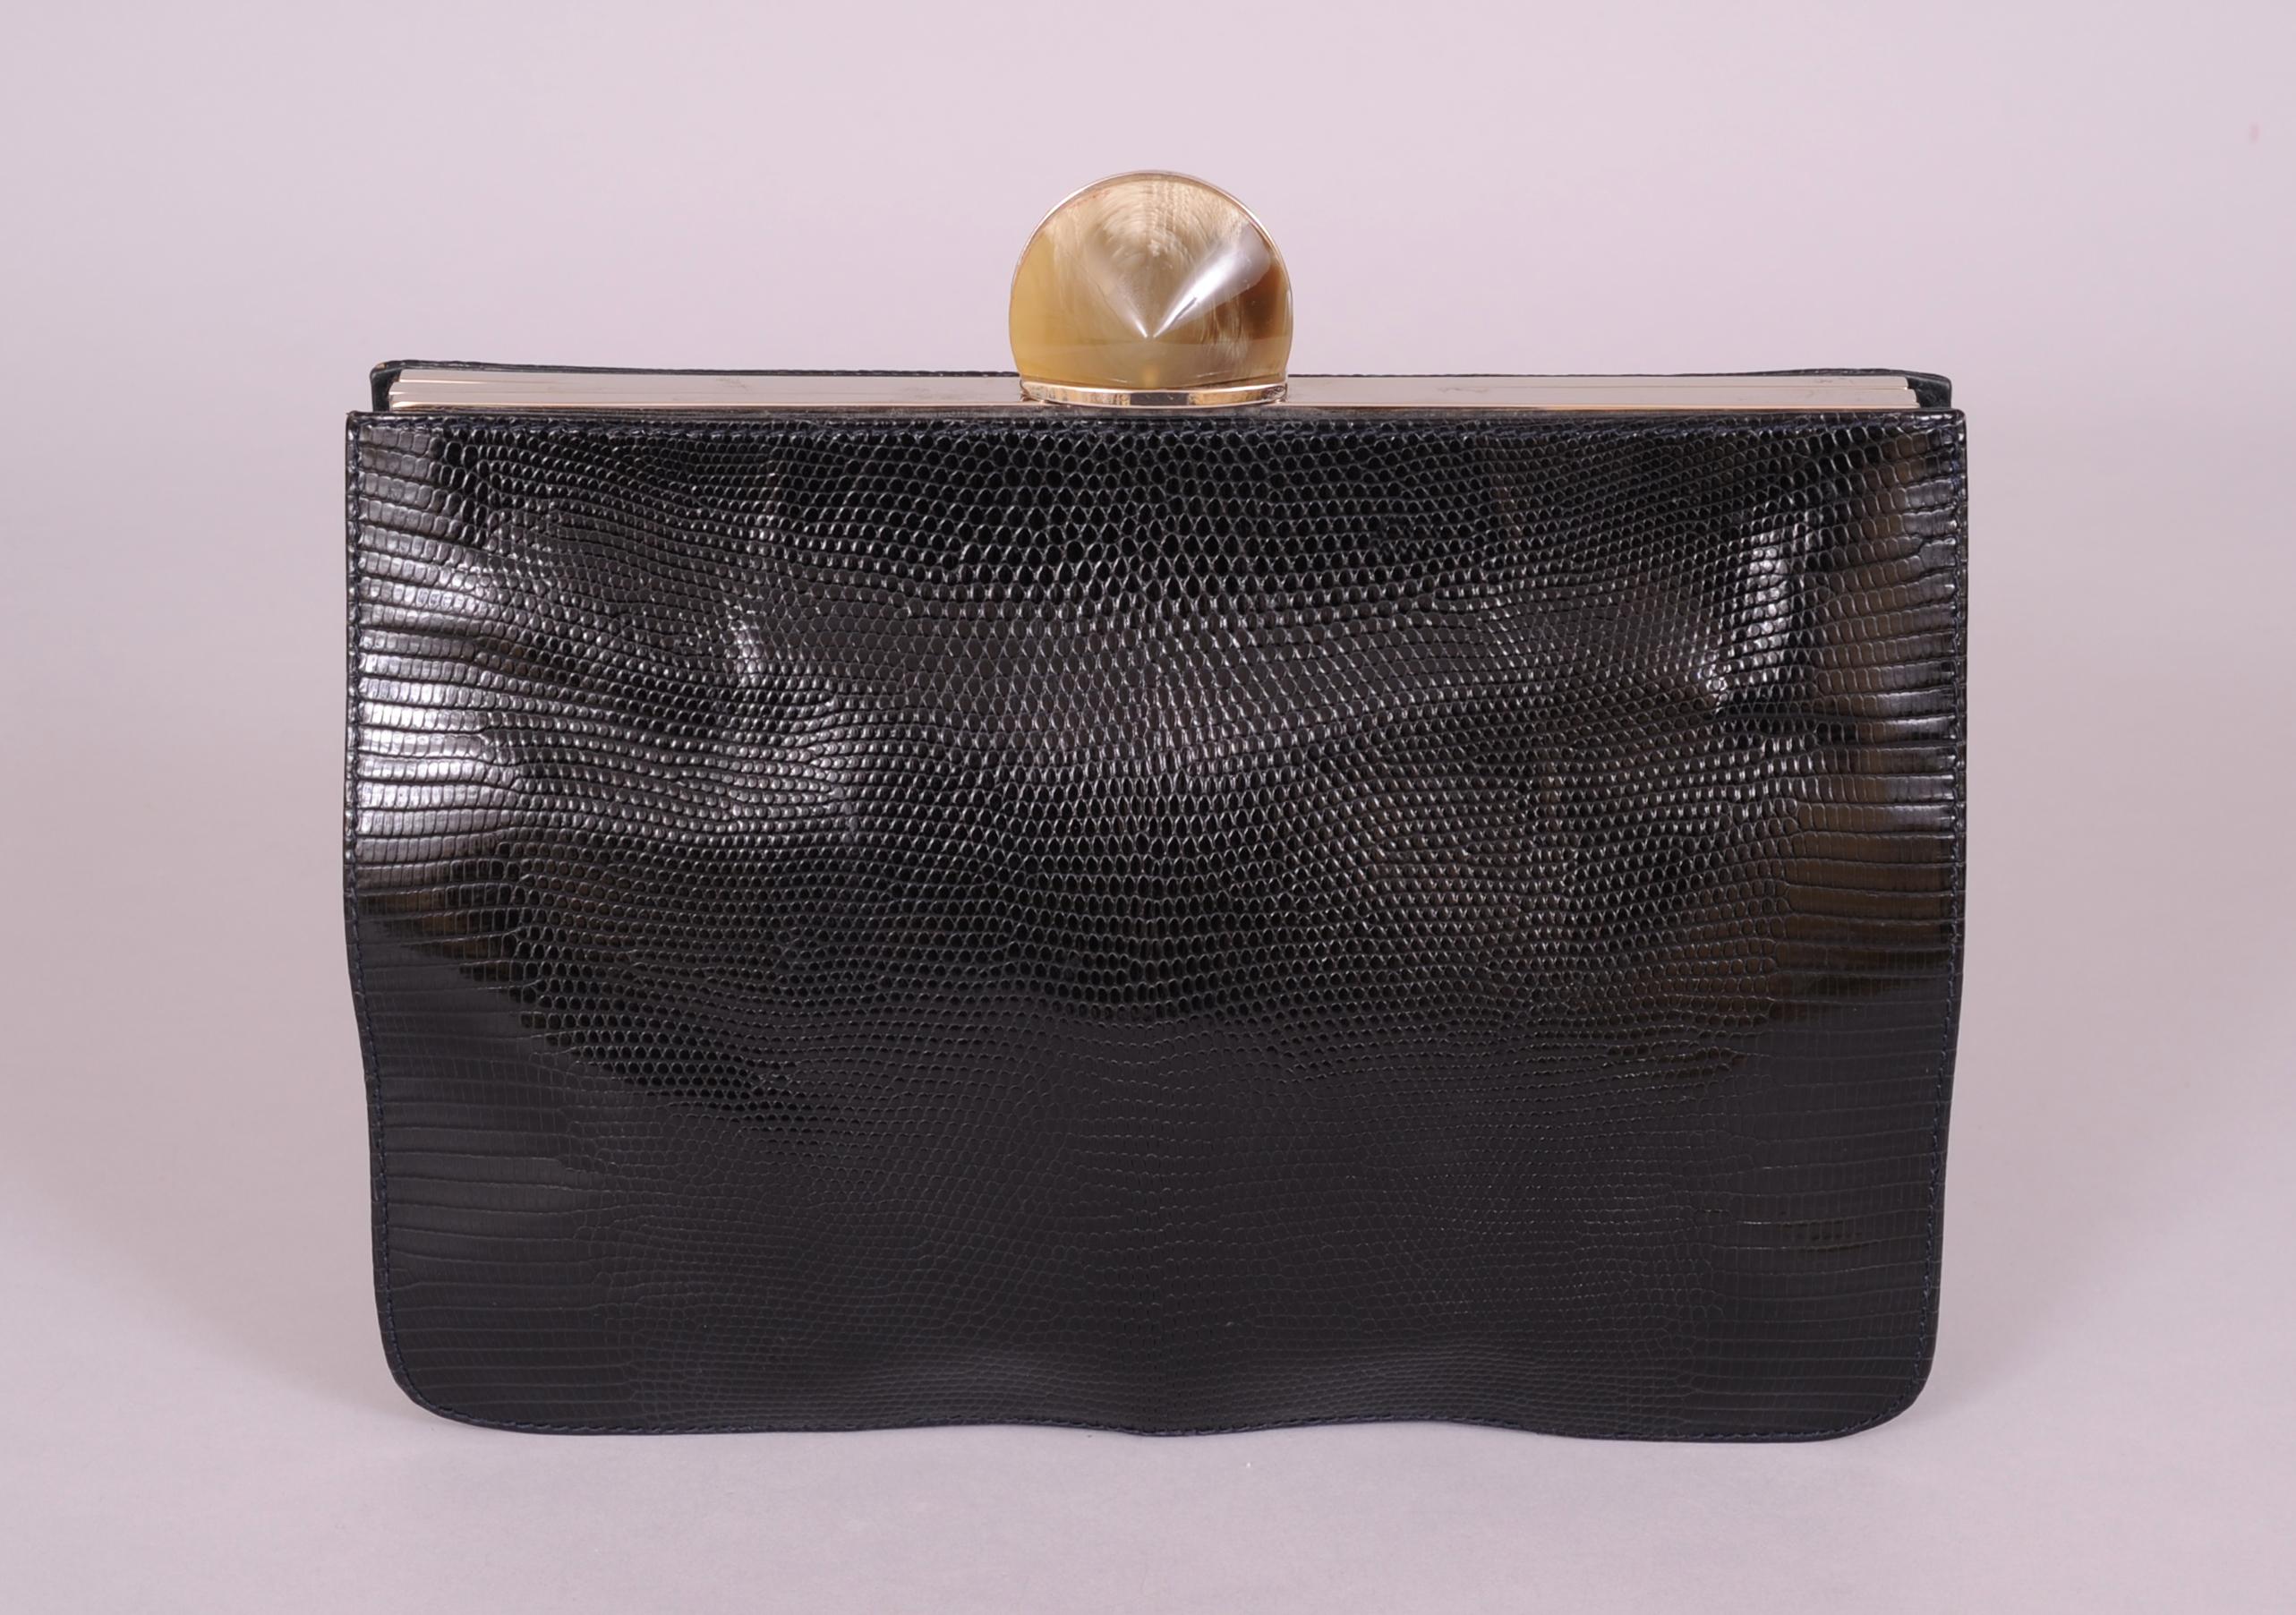 Women's Desmo Black Lizard Clutch with Faceted Stone Clasp